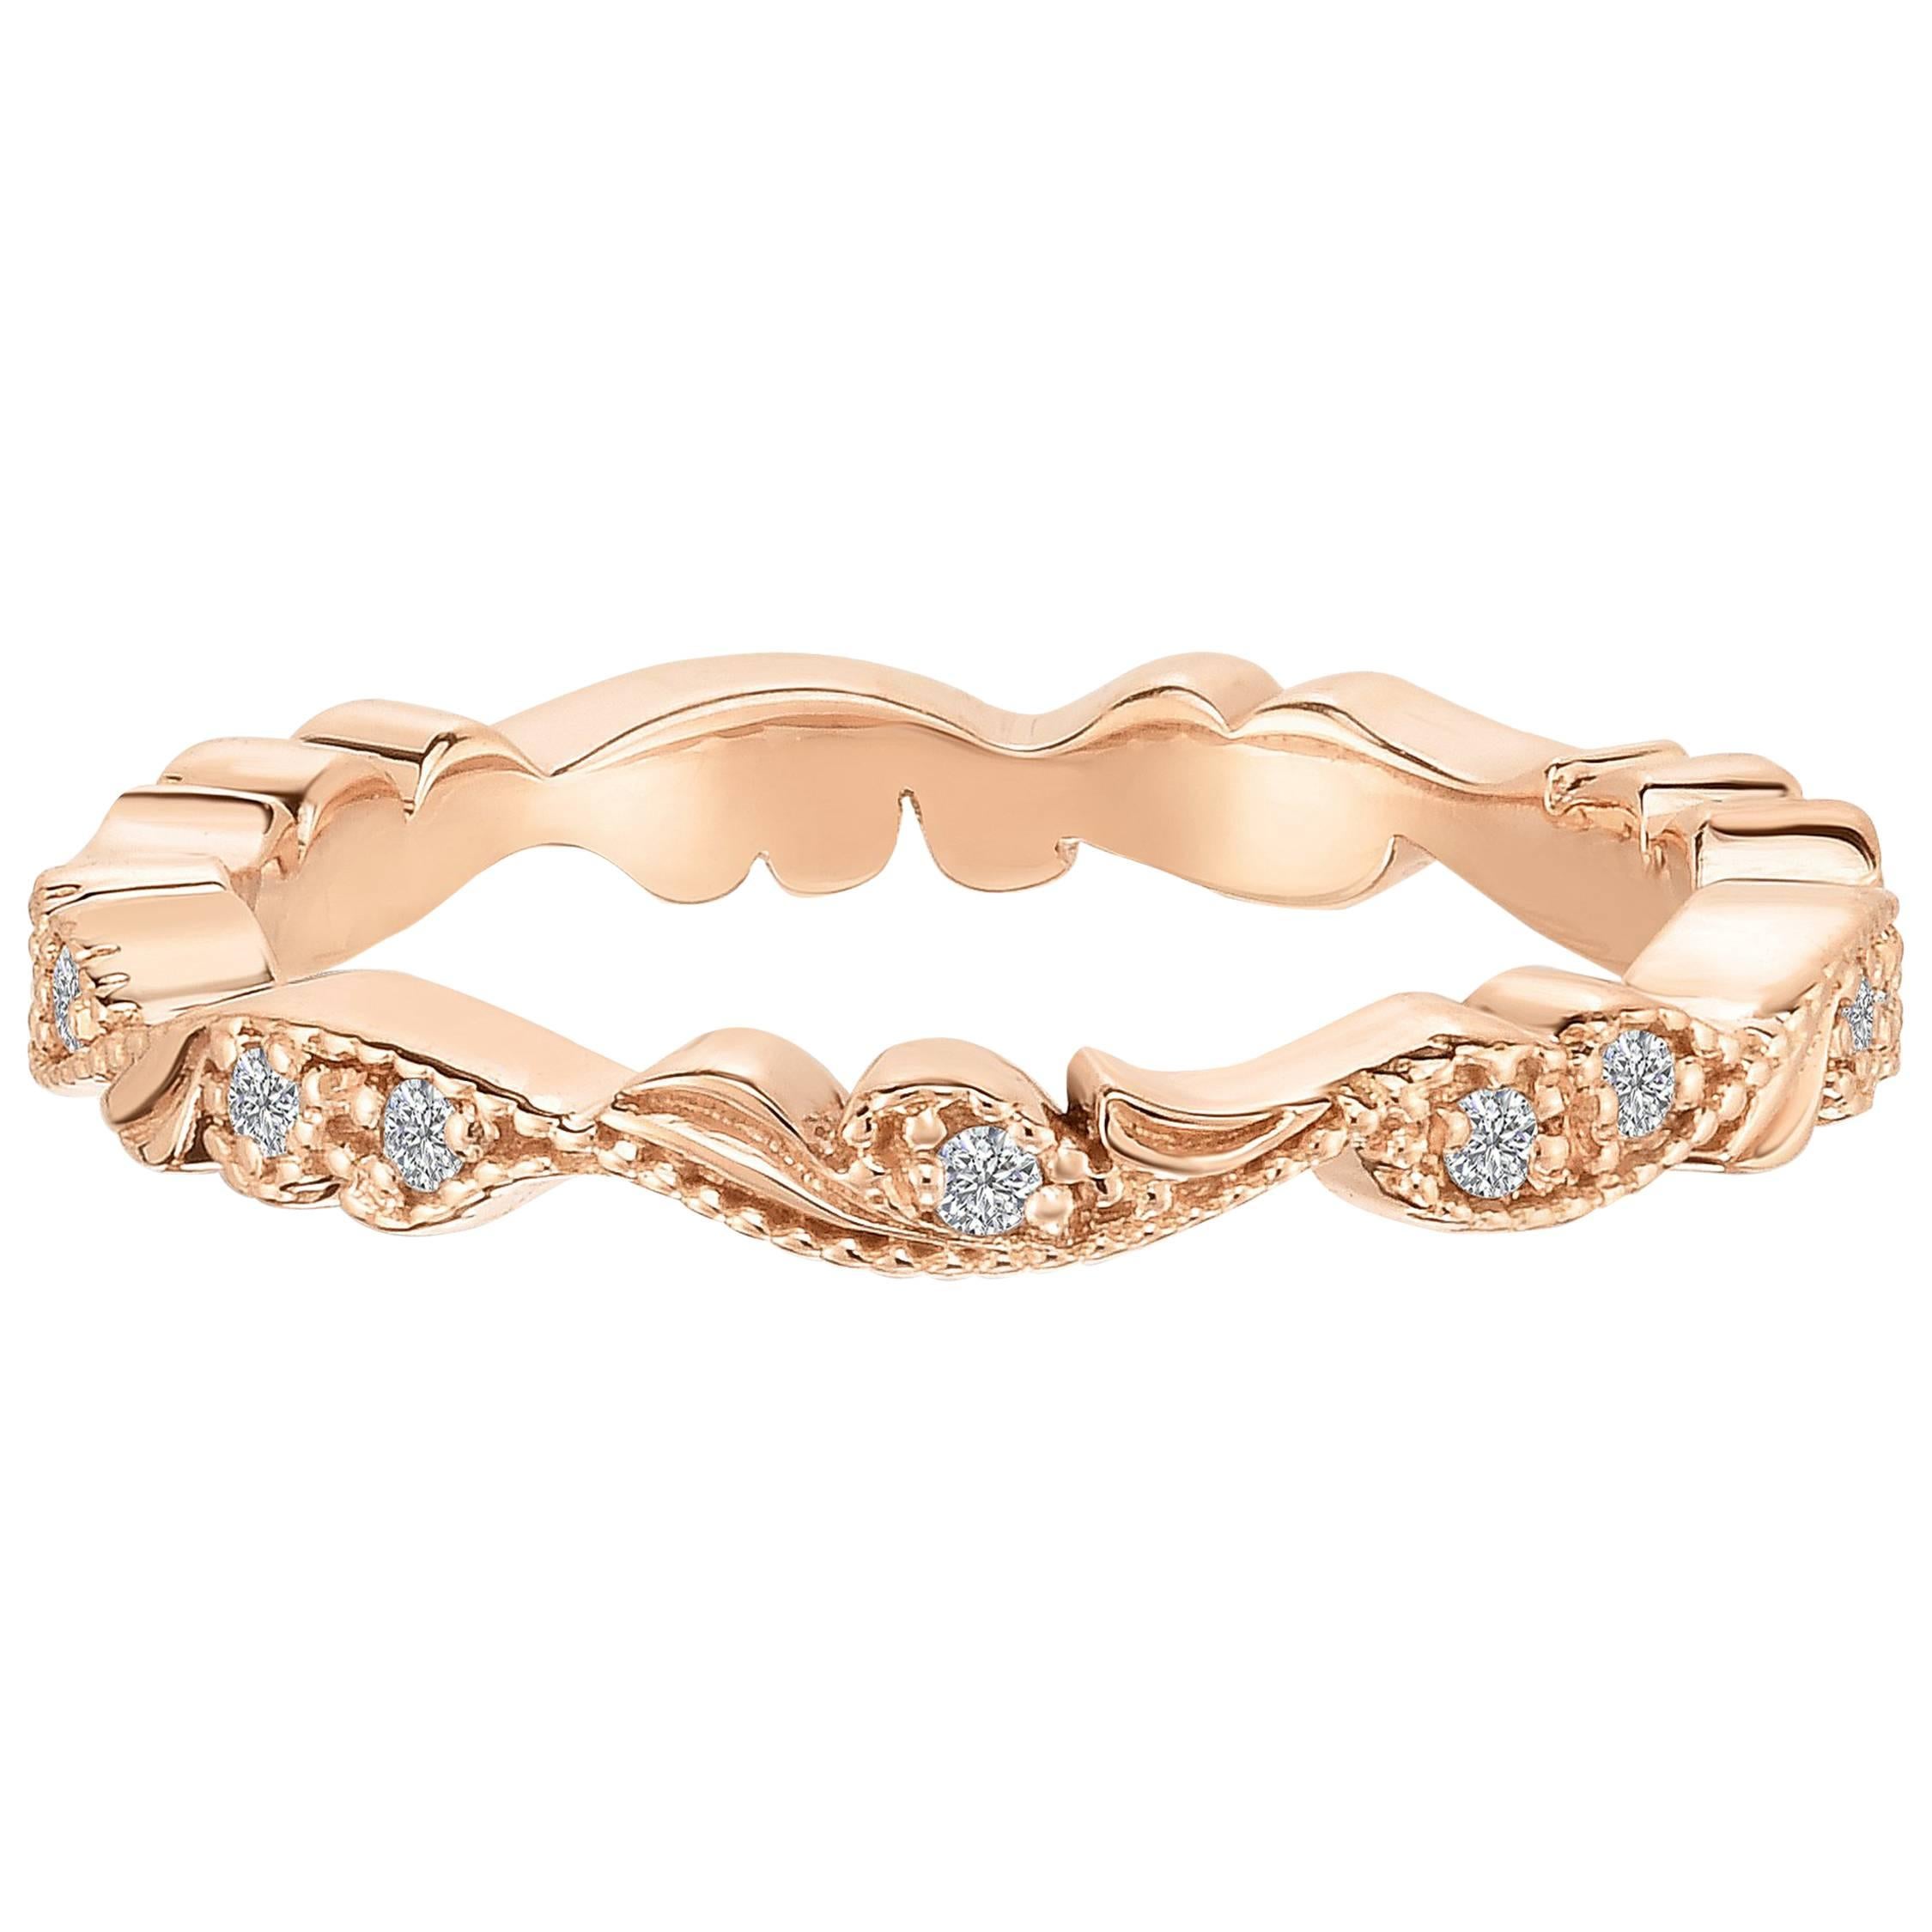 Marisa Perry's Rose Gold Diamond Chantilly Lace Band Ring For Sale